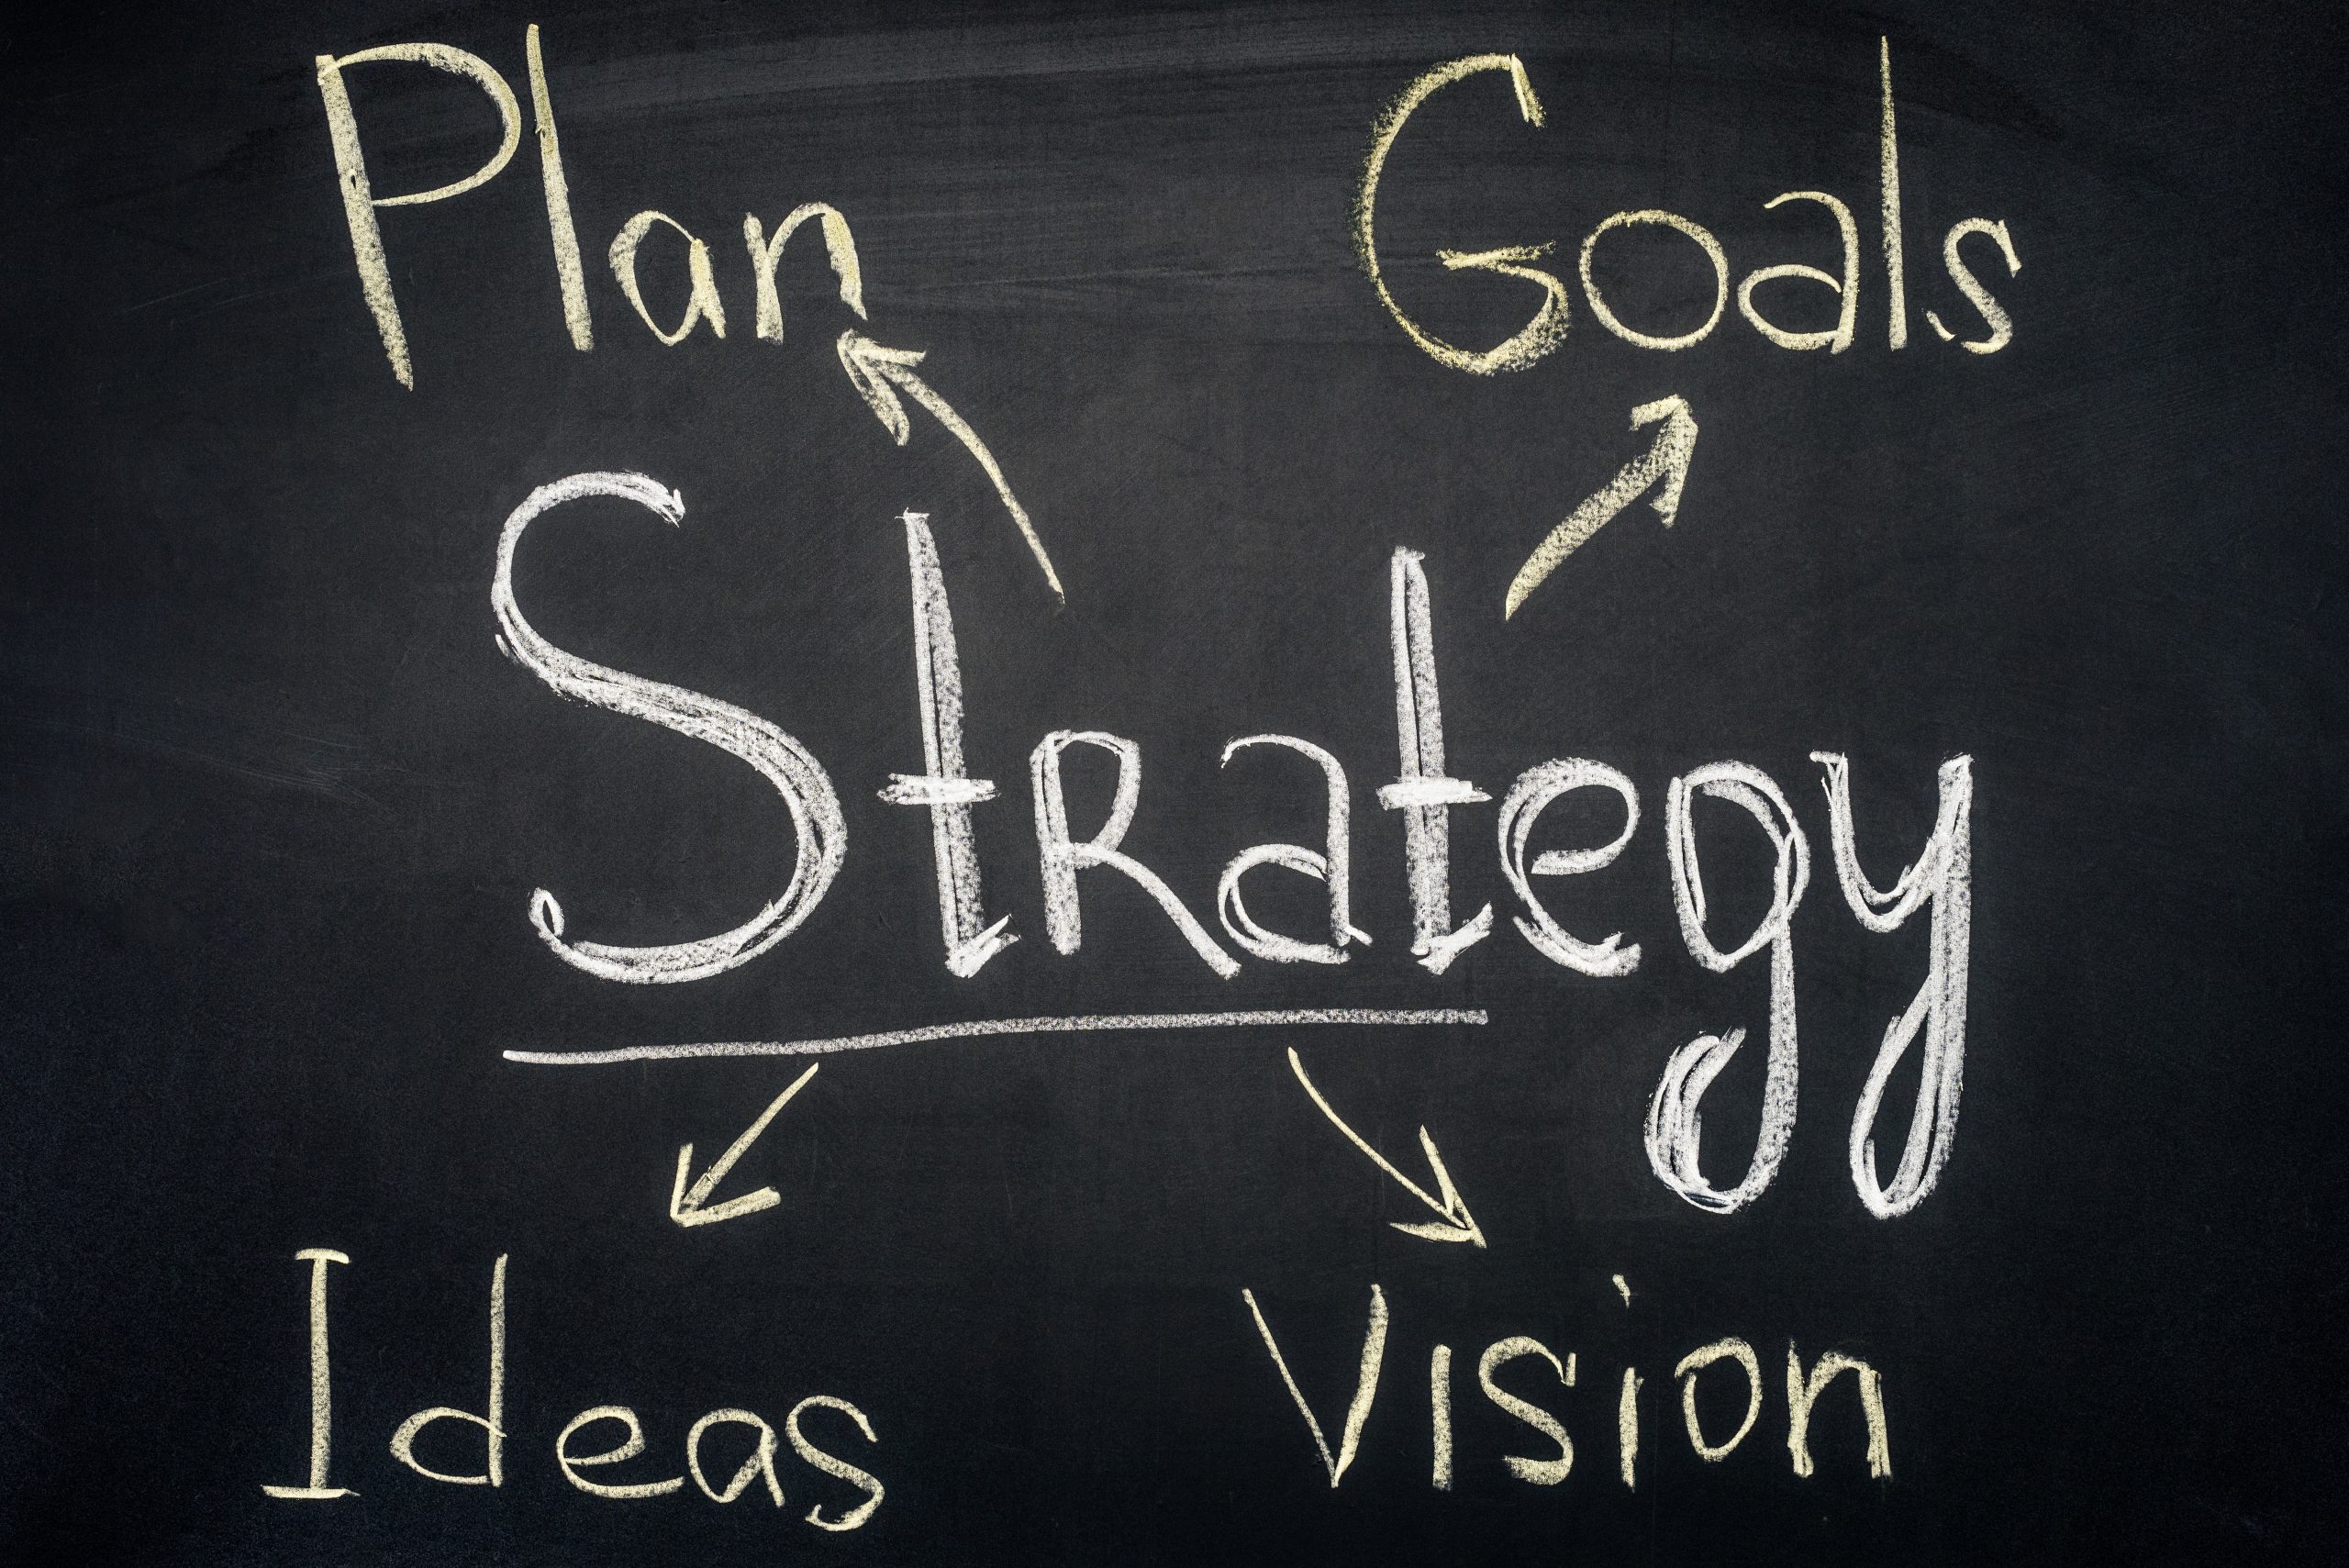 The words strategy plan goals ideas and vision